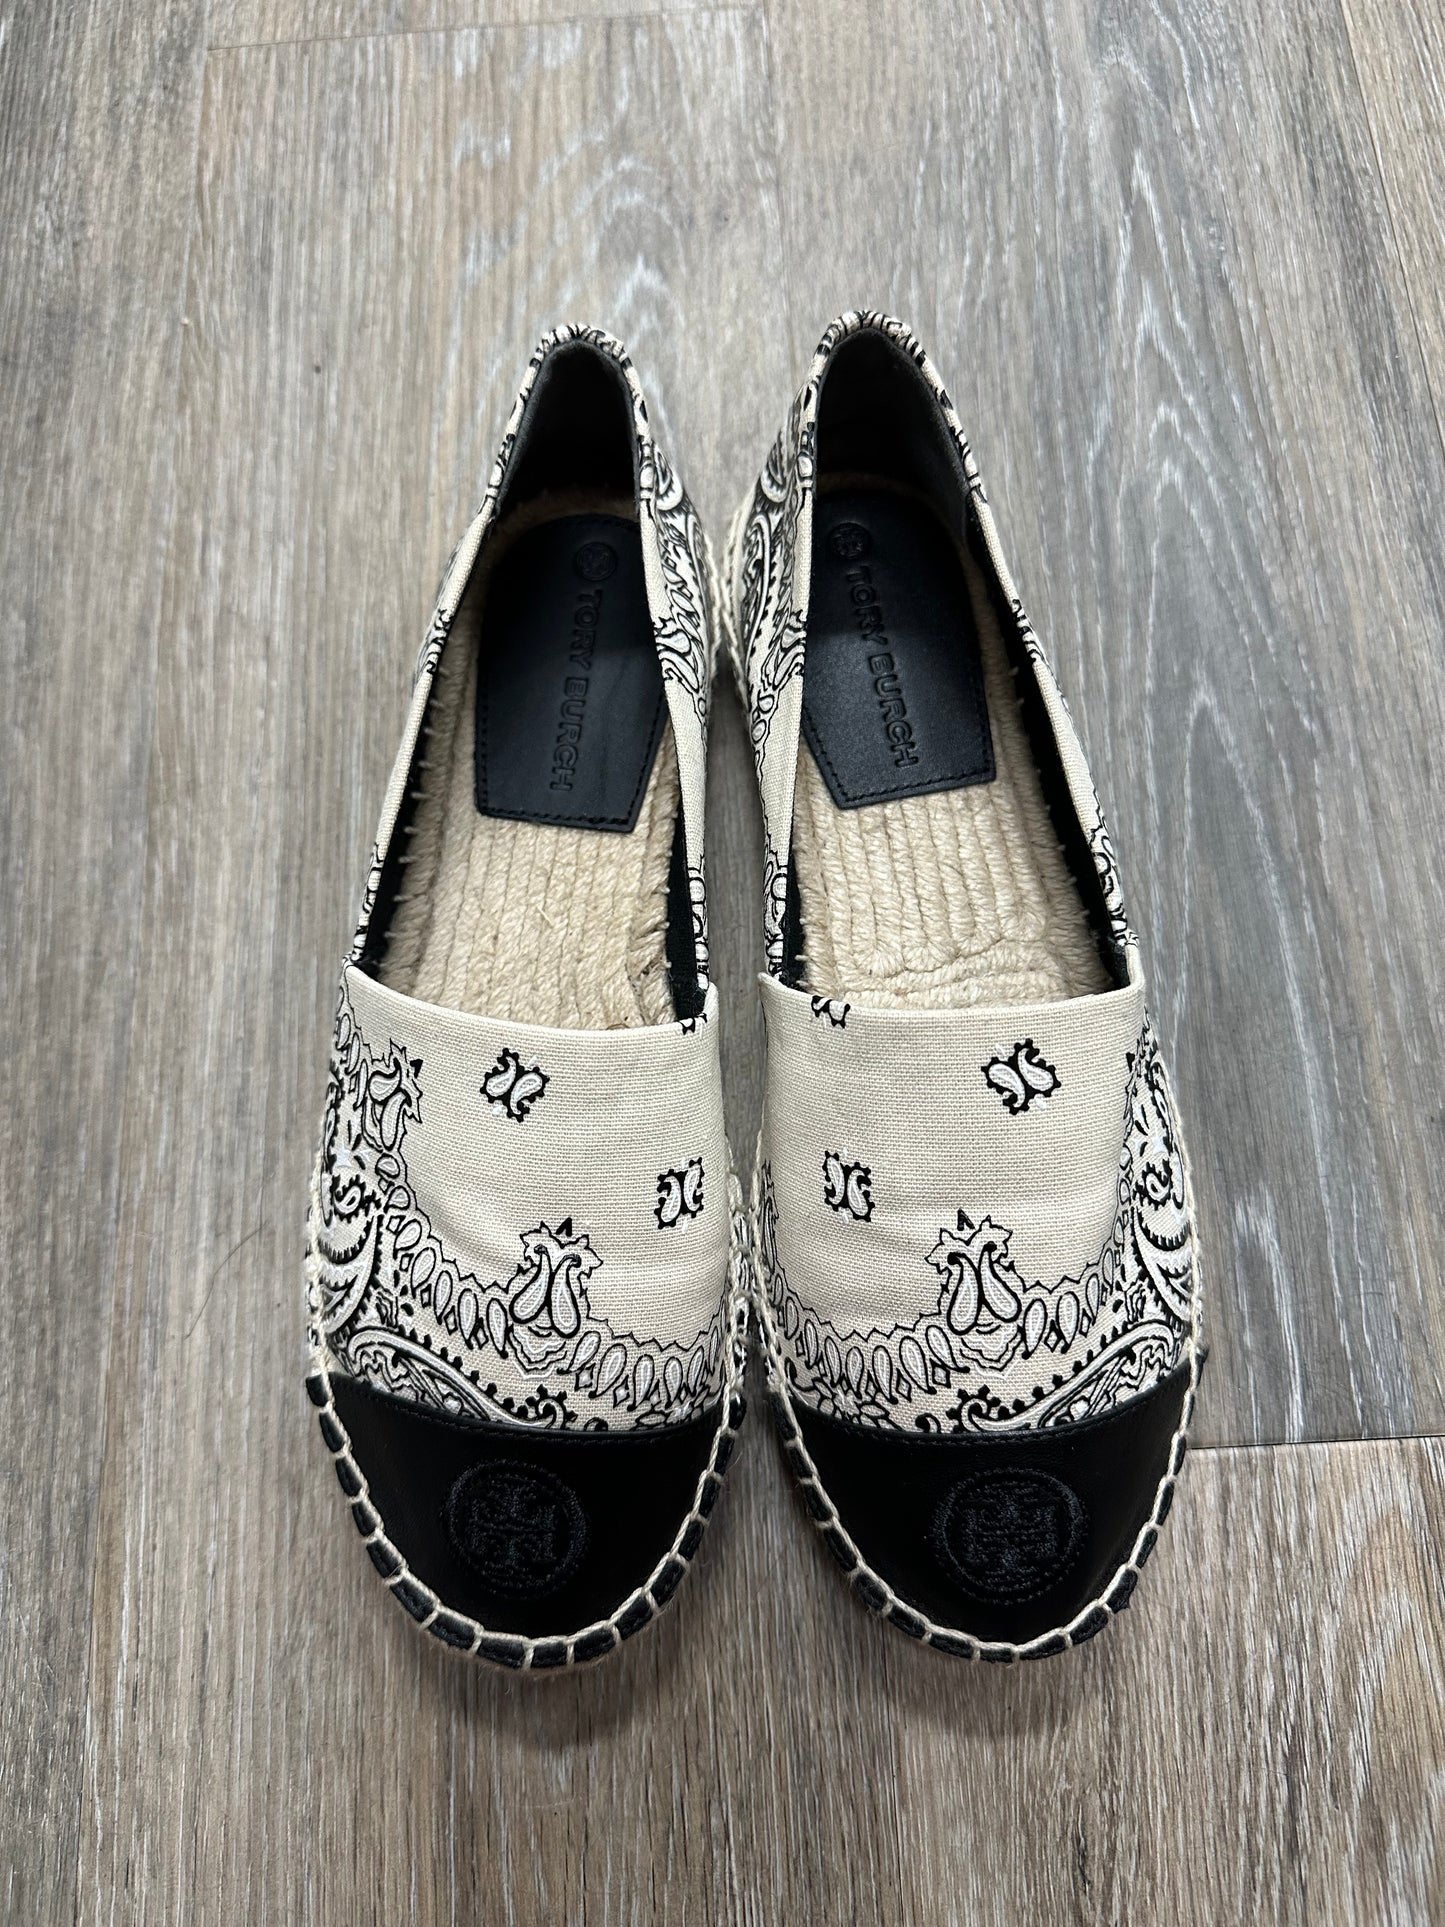 Shoes Flats Espadrille By Tory Burch  Size: 6.5